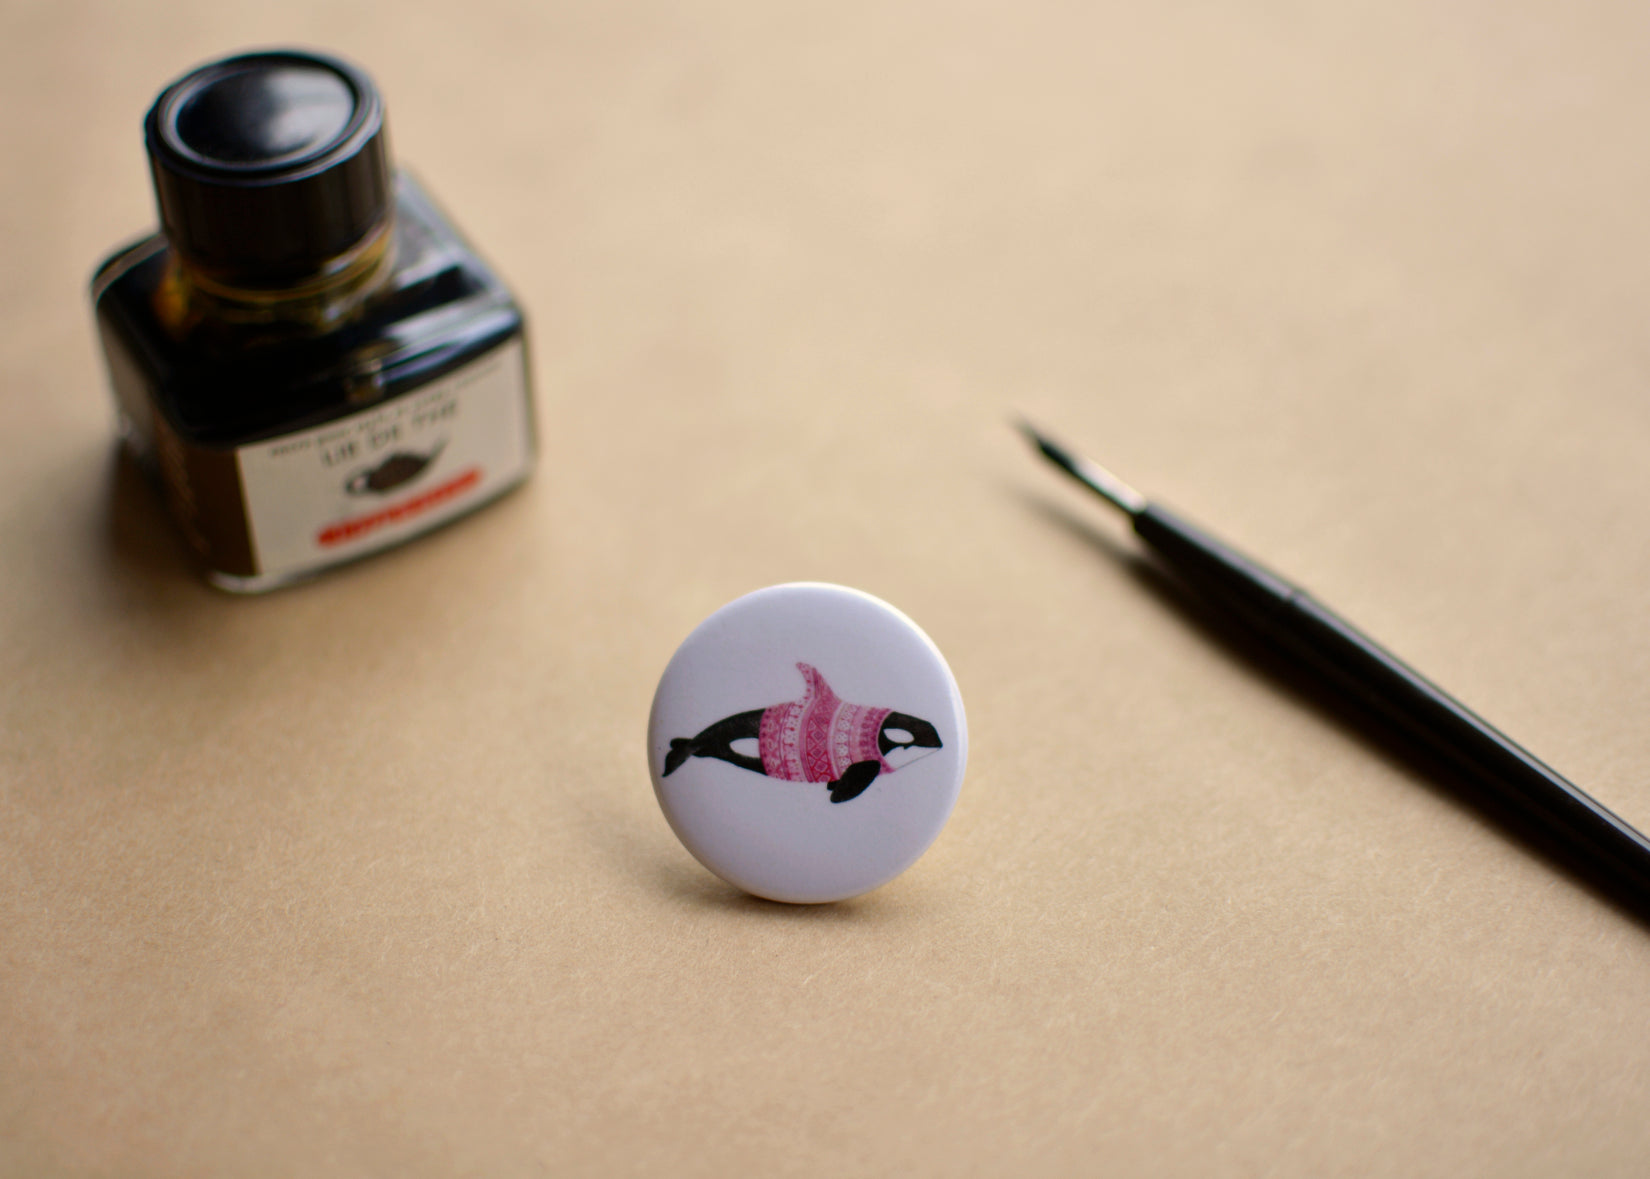 Ink drawing of a humpback whale wearing a pink sweater on a pin-backed button. Featured with a ink bottle and dip pen.